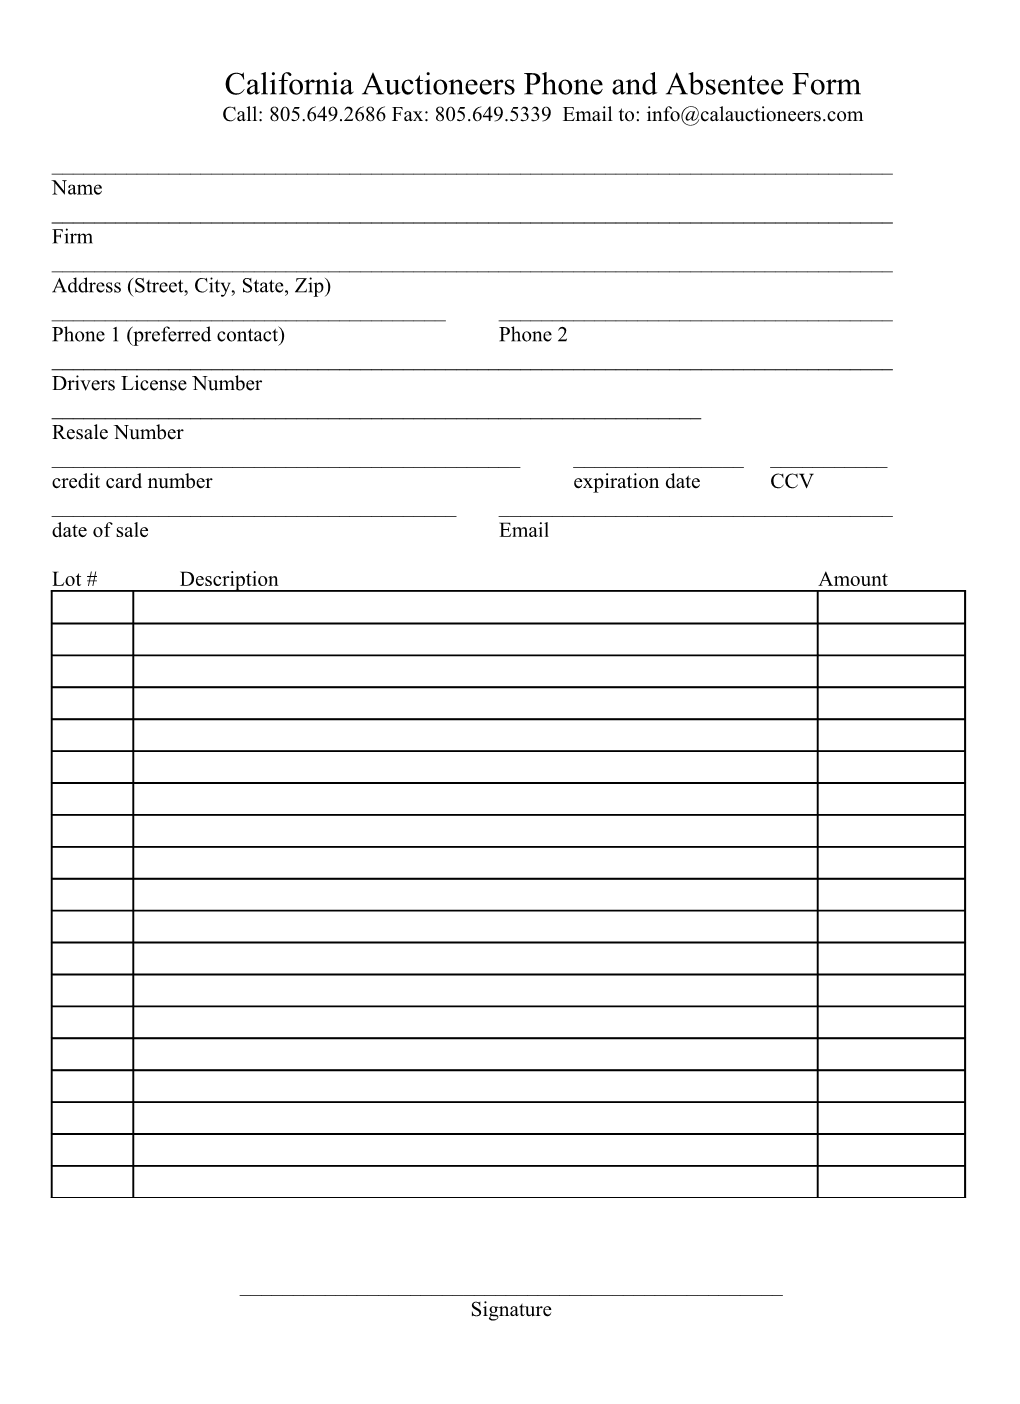 Phone and Absentee Form